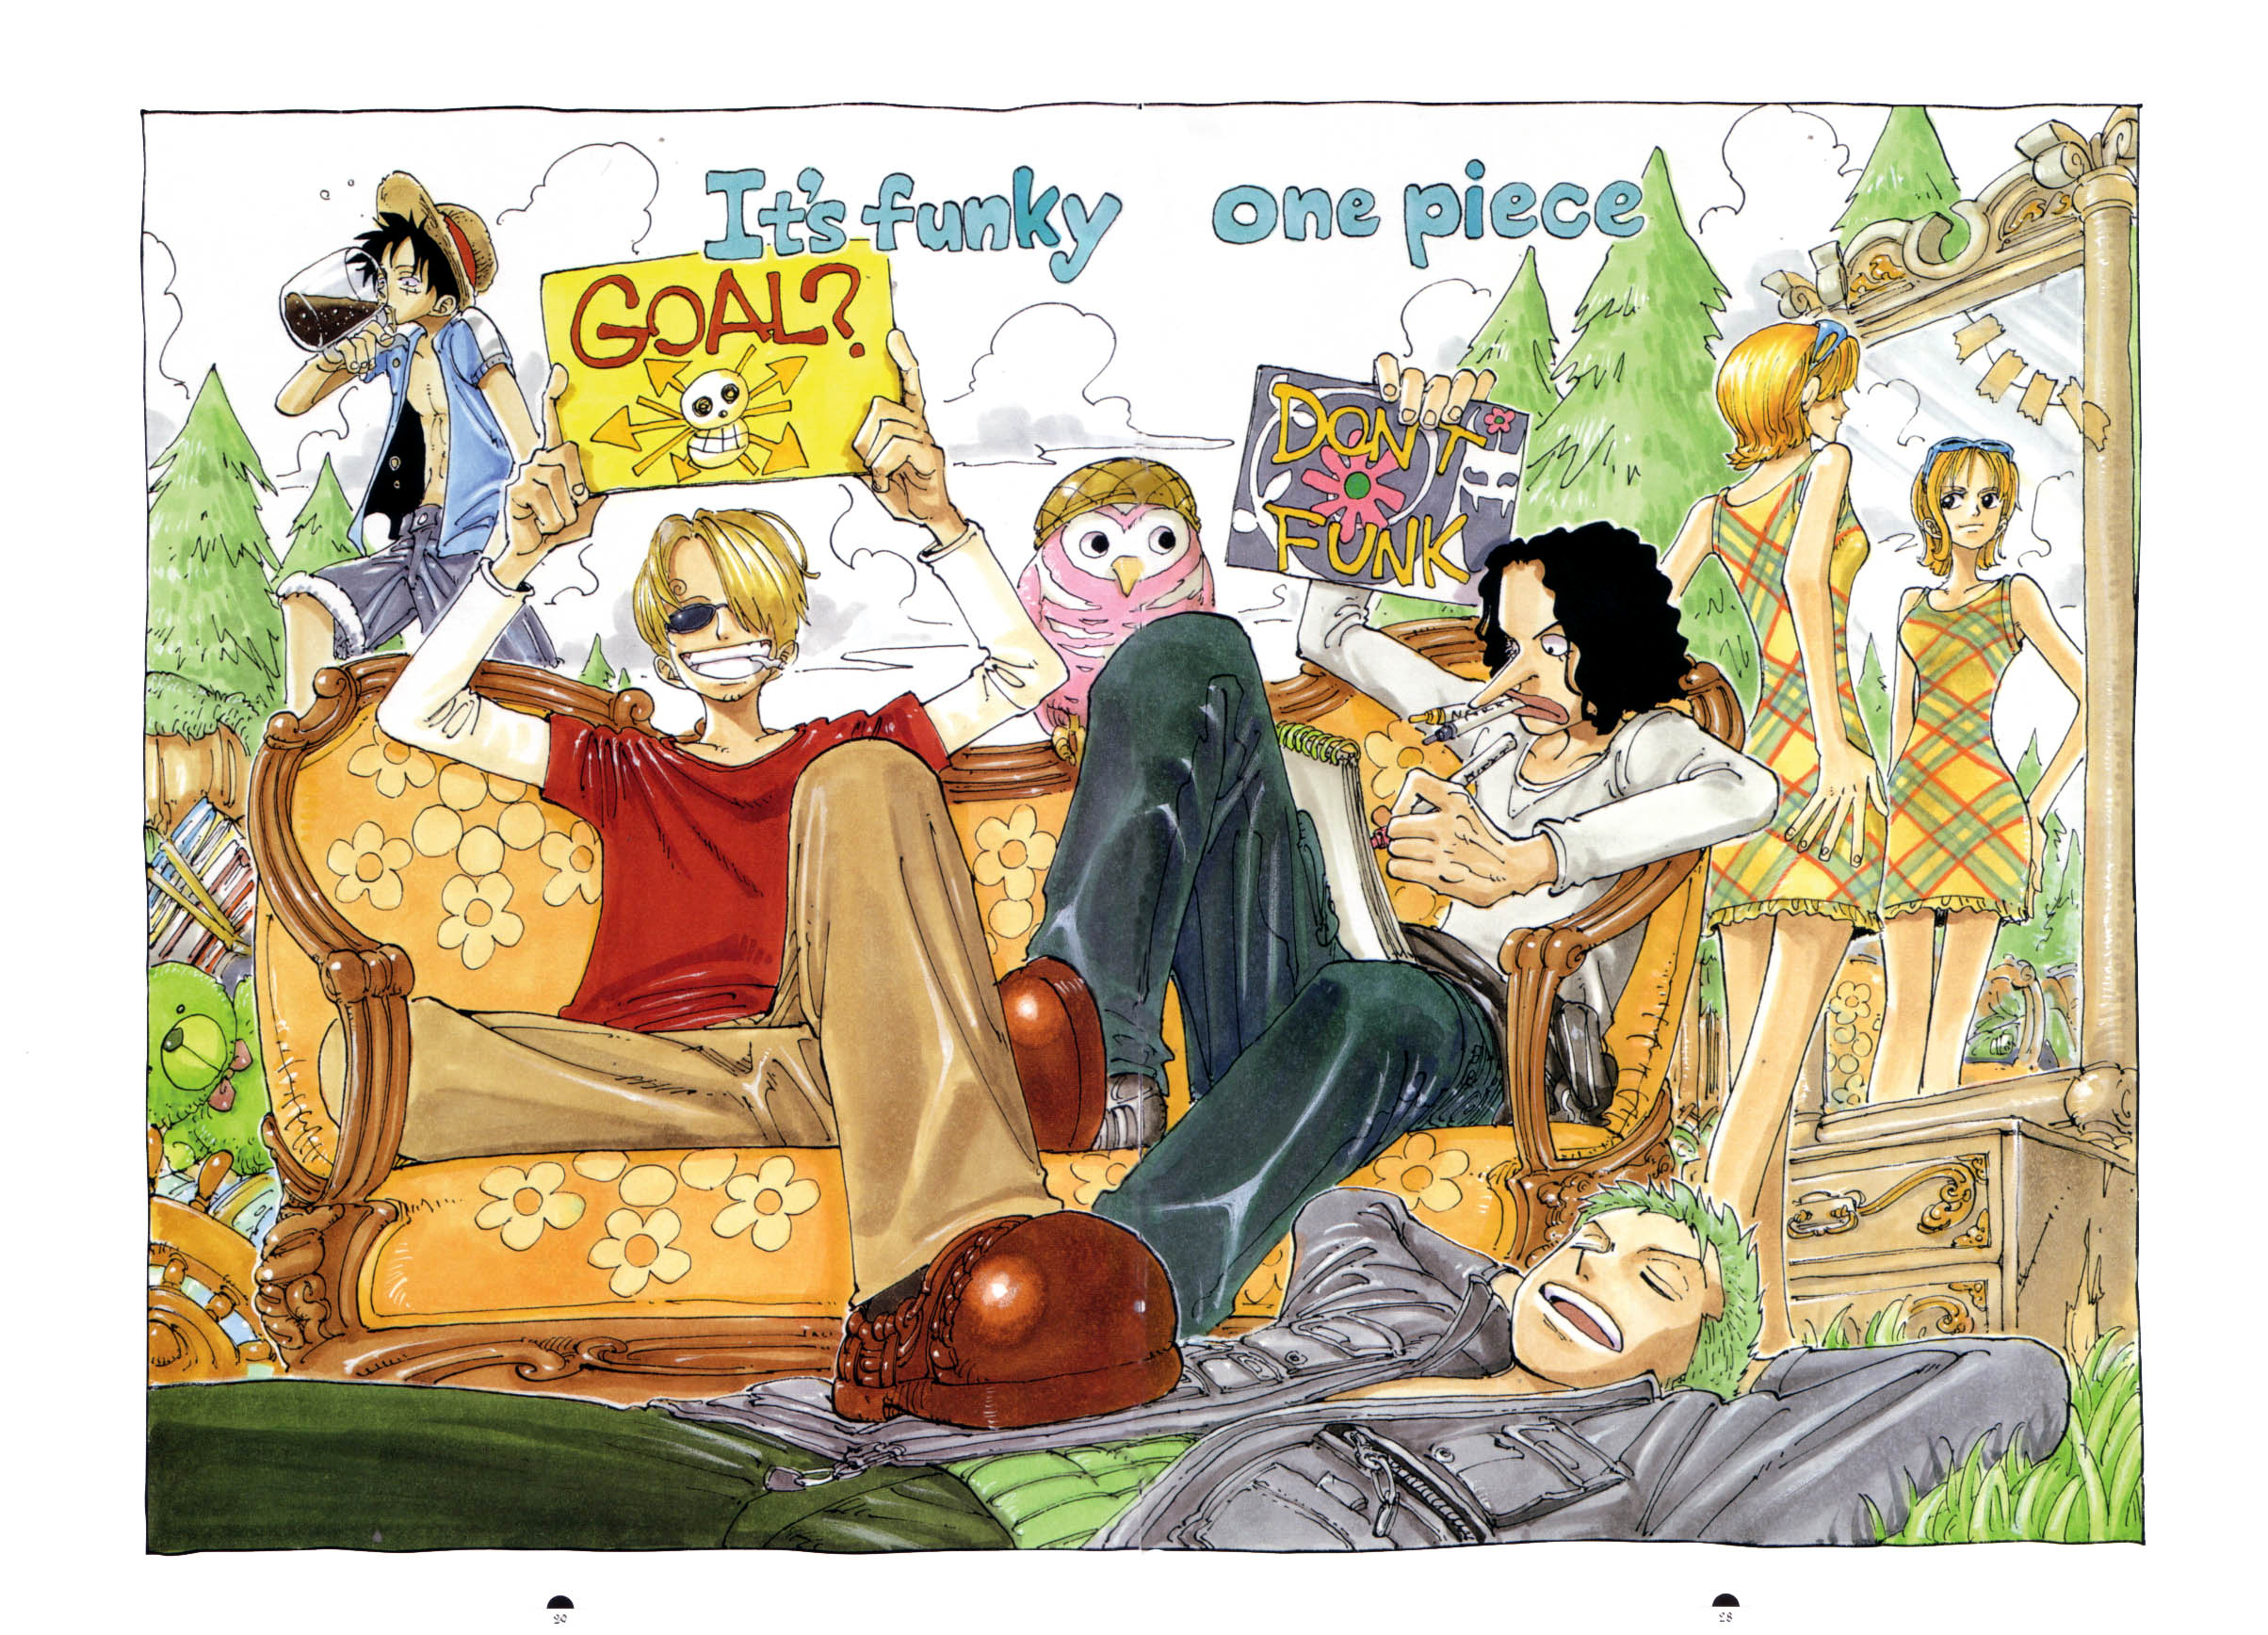 https://static.wikia.nocookie.net/onepiece/images/2/26/Chapter_107.png/revision/latest?cb=20130121040533